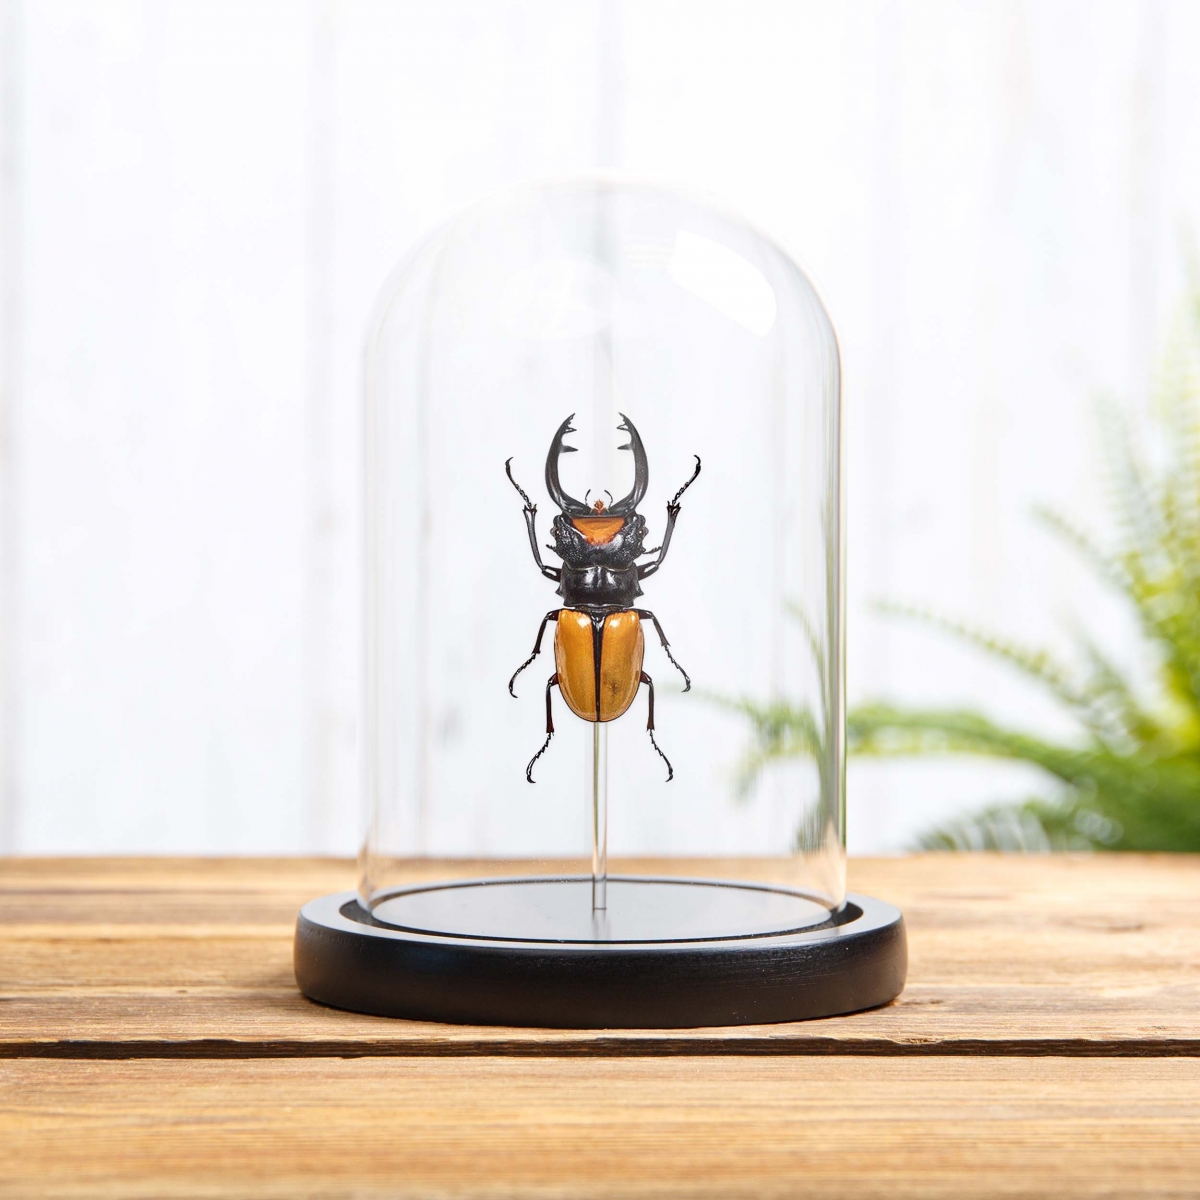 Minibeast Stag Beetle in Glass Dome with Wooden Base (Odontolabis lacordairei)